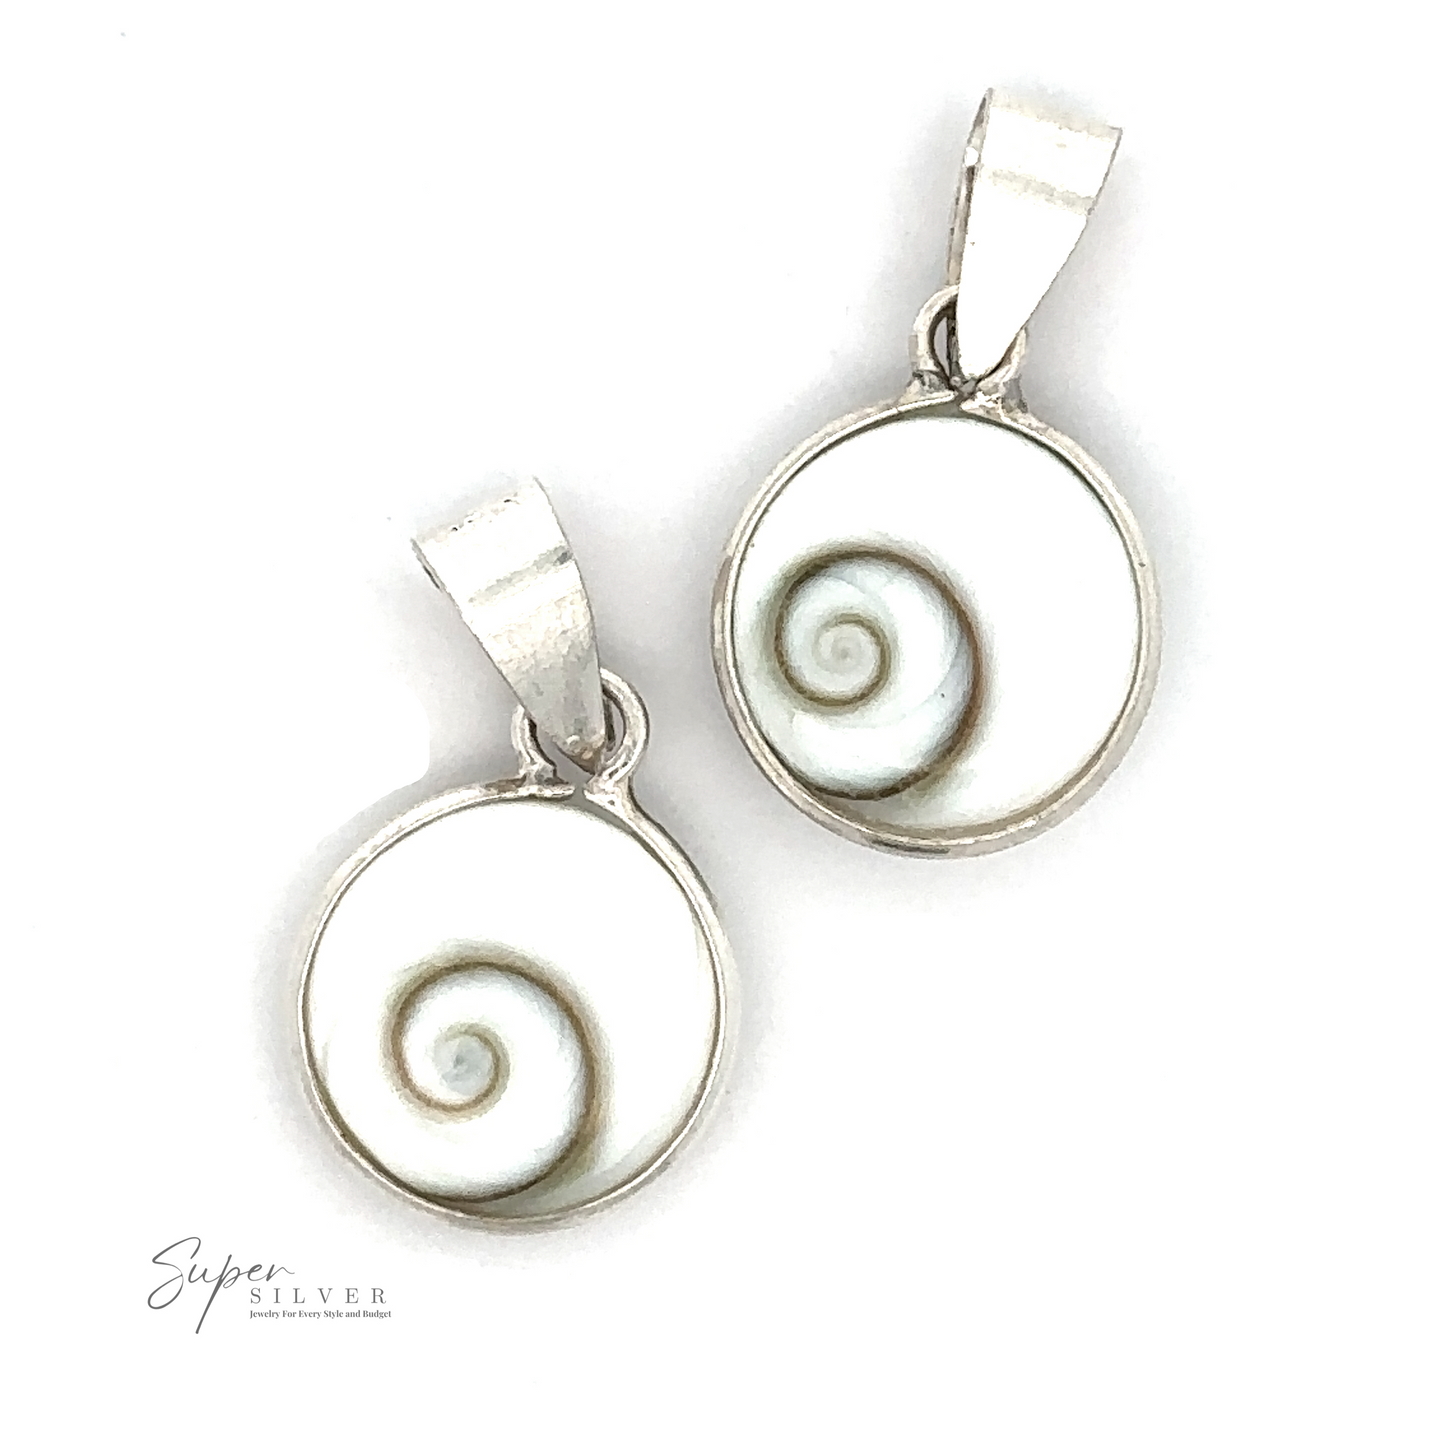 
                  
                    Two round, silver pendants featuring white shells with a green spiral pattern in the center exude coastal elegance. These Small Round Shiva Shell Pendants have loop bails at the top for attaching to a chain. Text reads "Super Silver" and they are crafted from .925 Sterling Silver.
                  
                